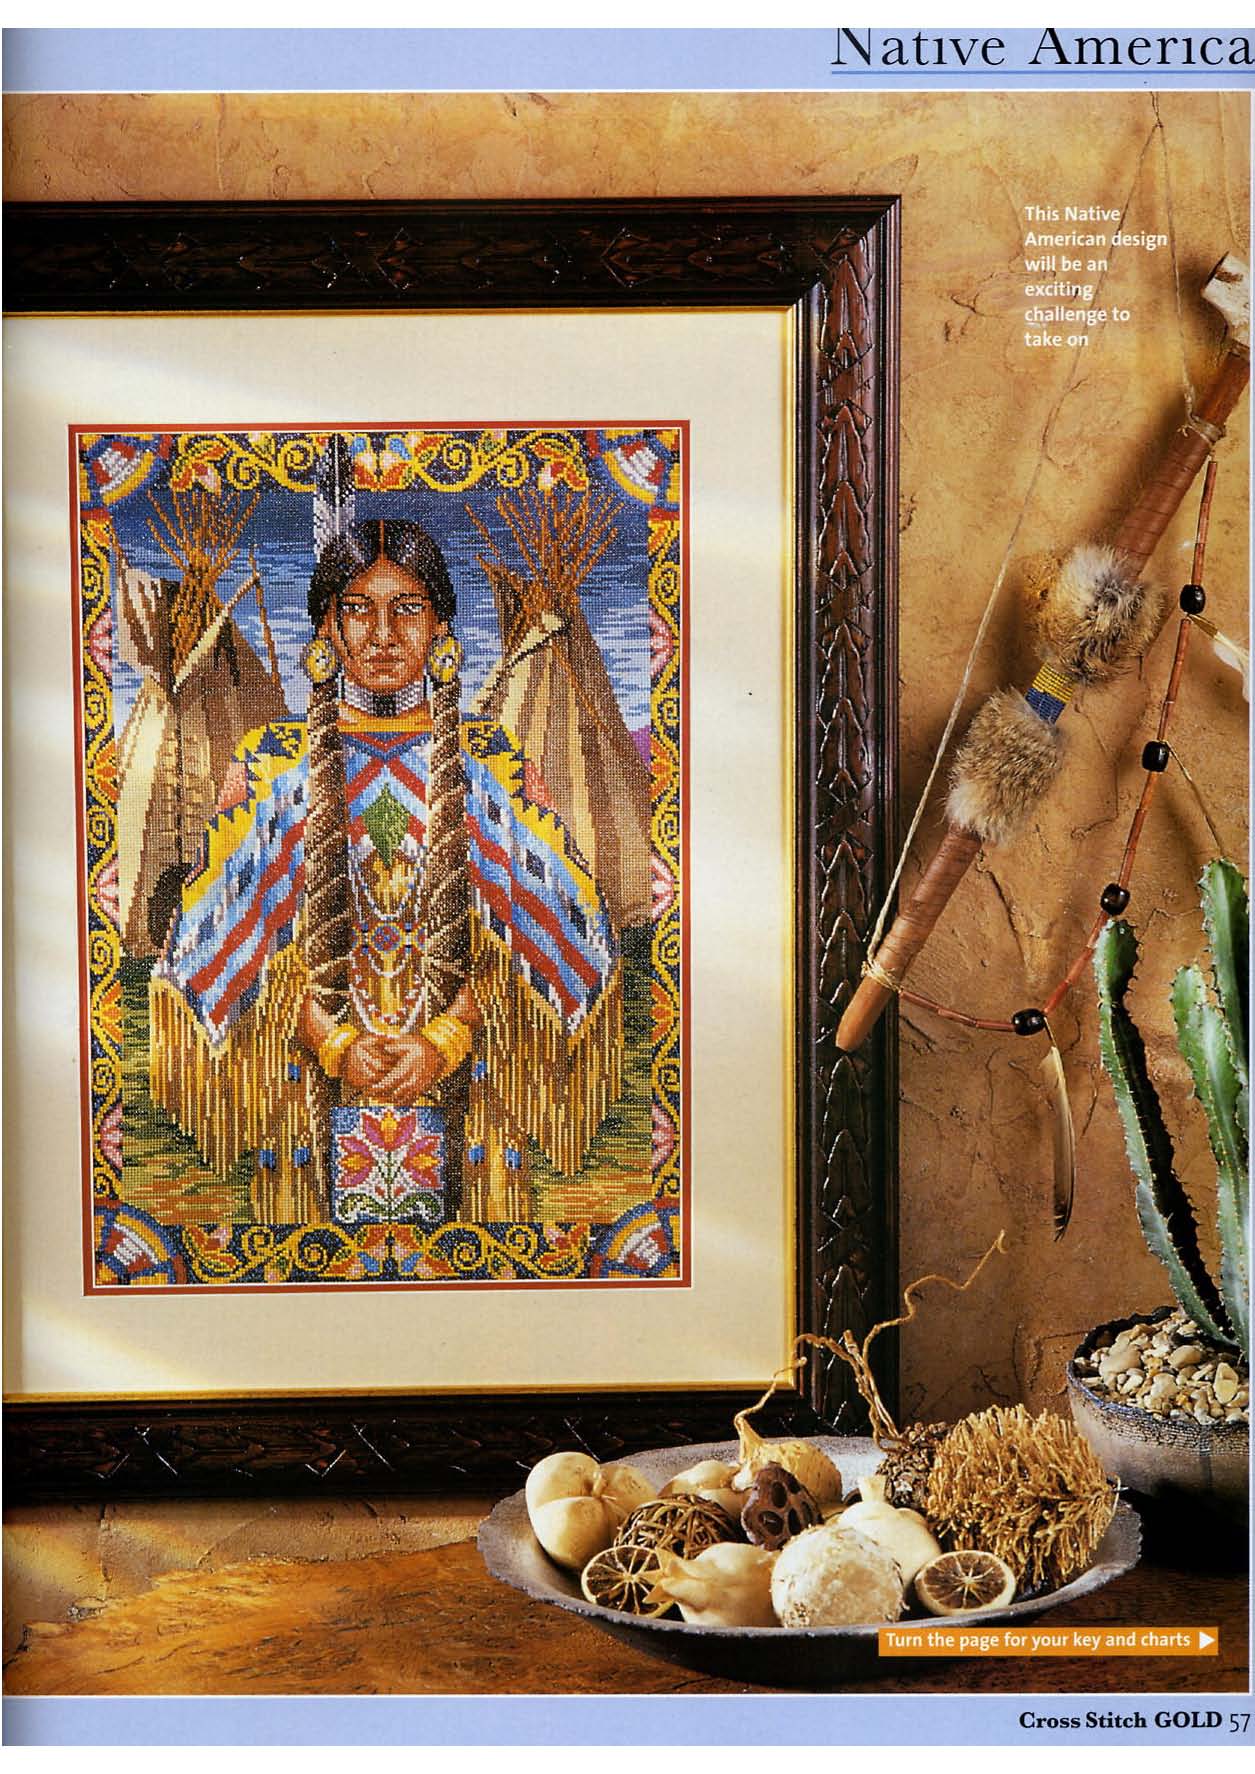 Cross stitch painting with Native Americans (1)